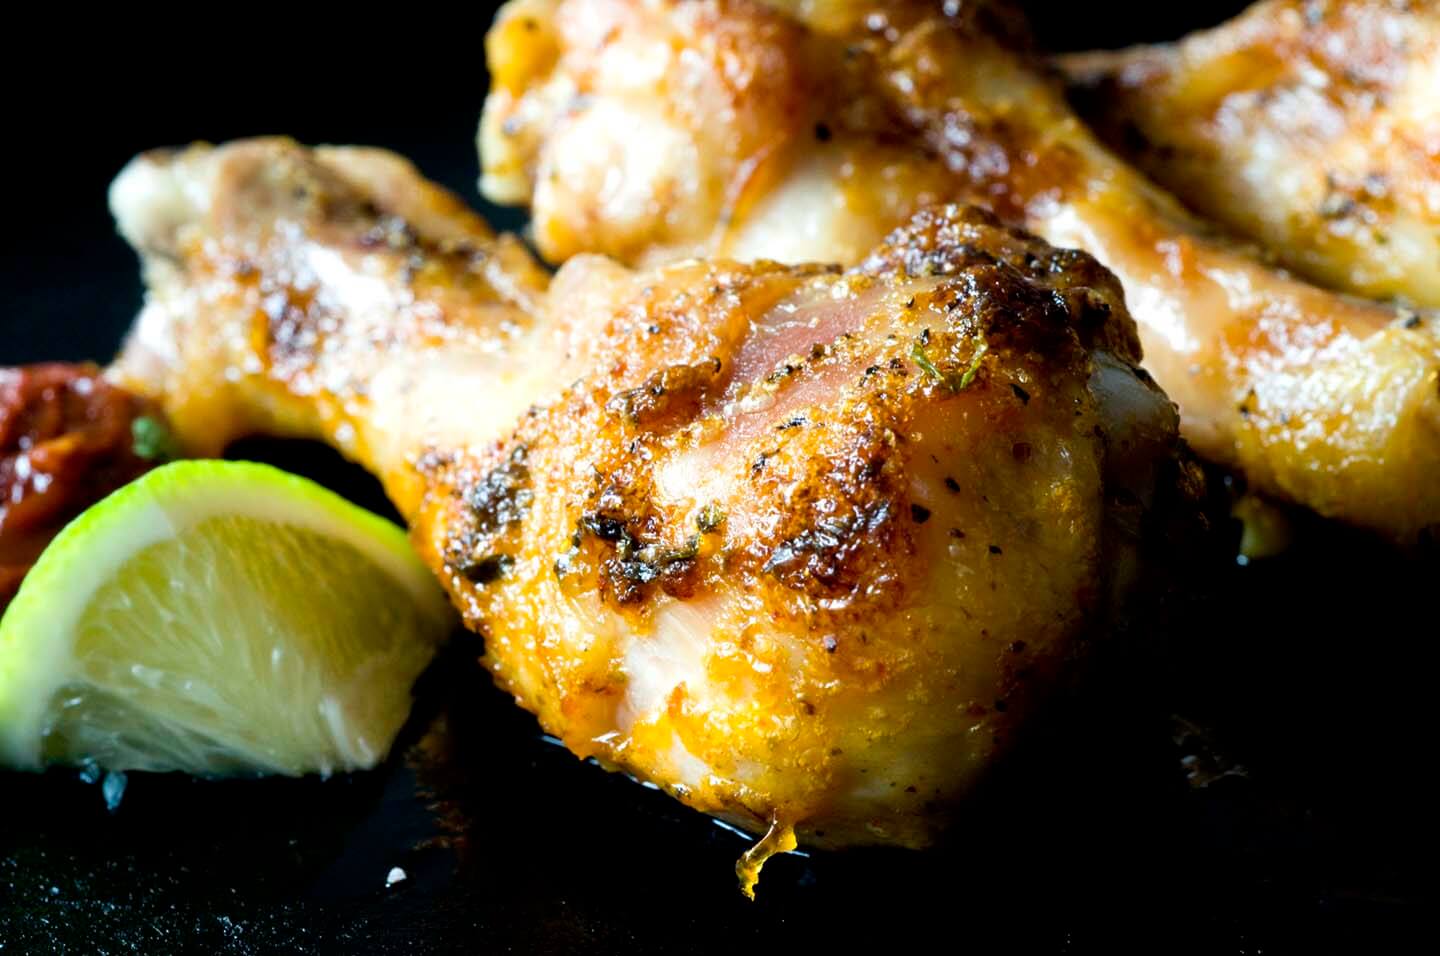 Roasted chicken with chipotle